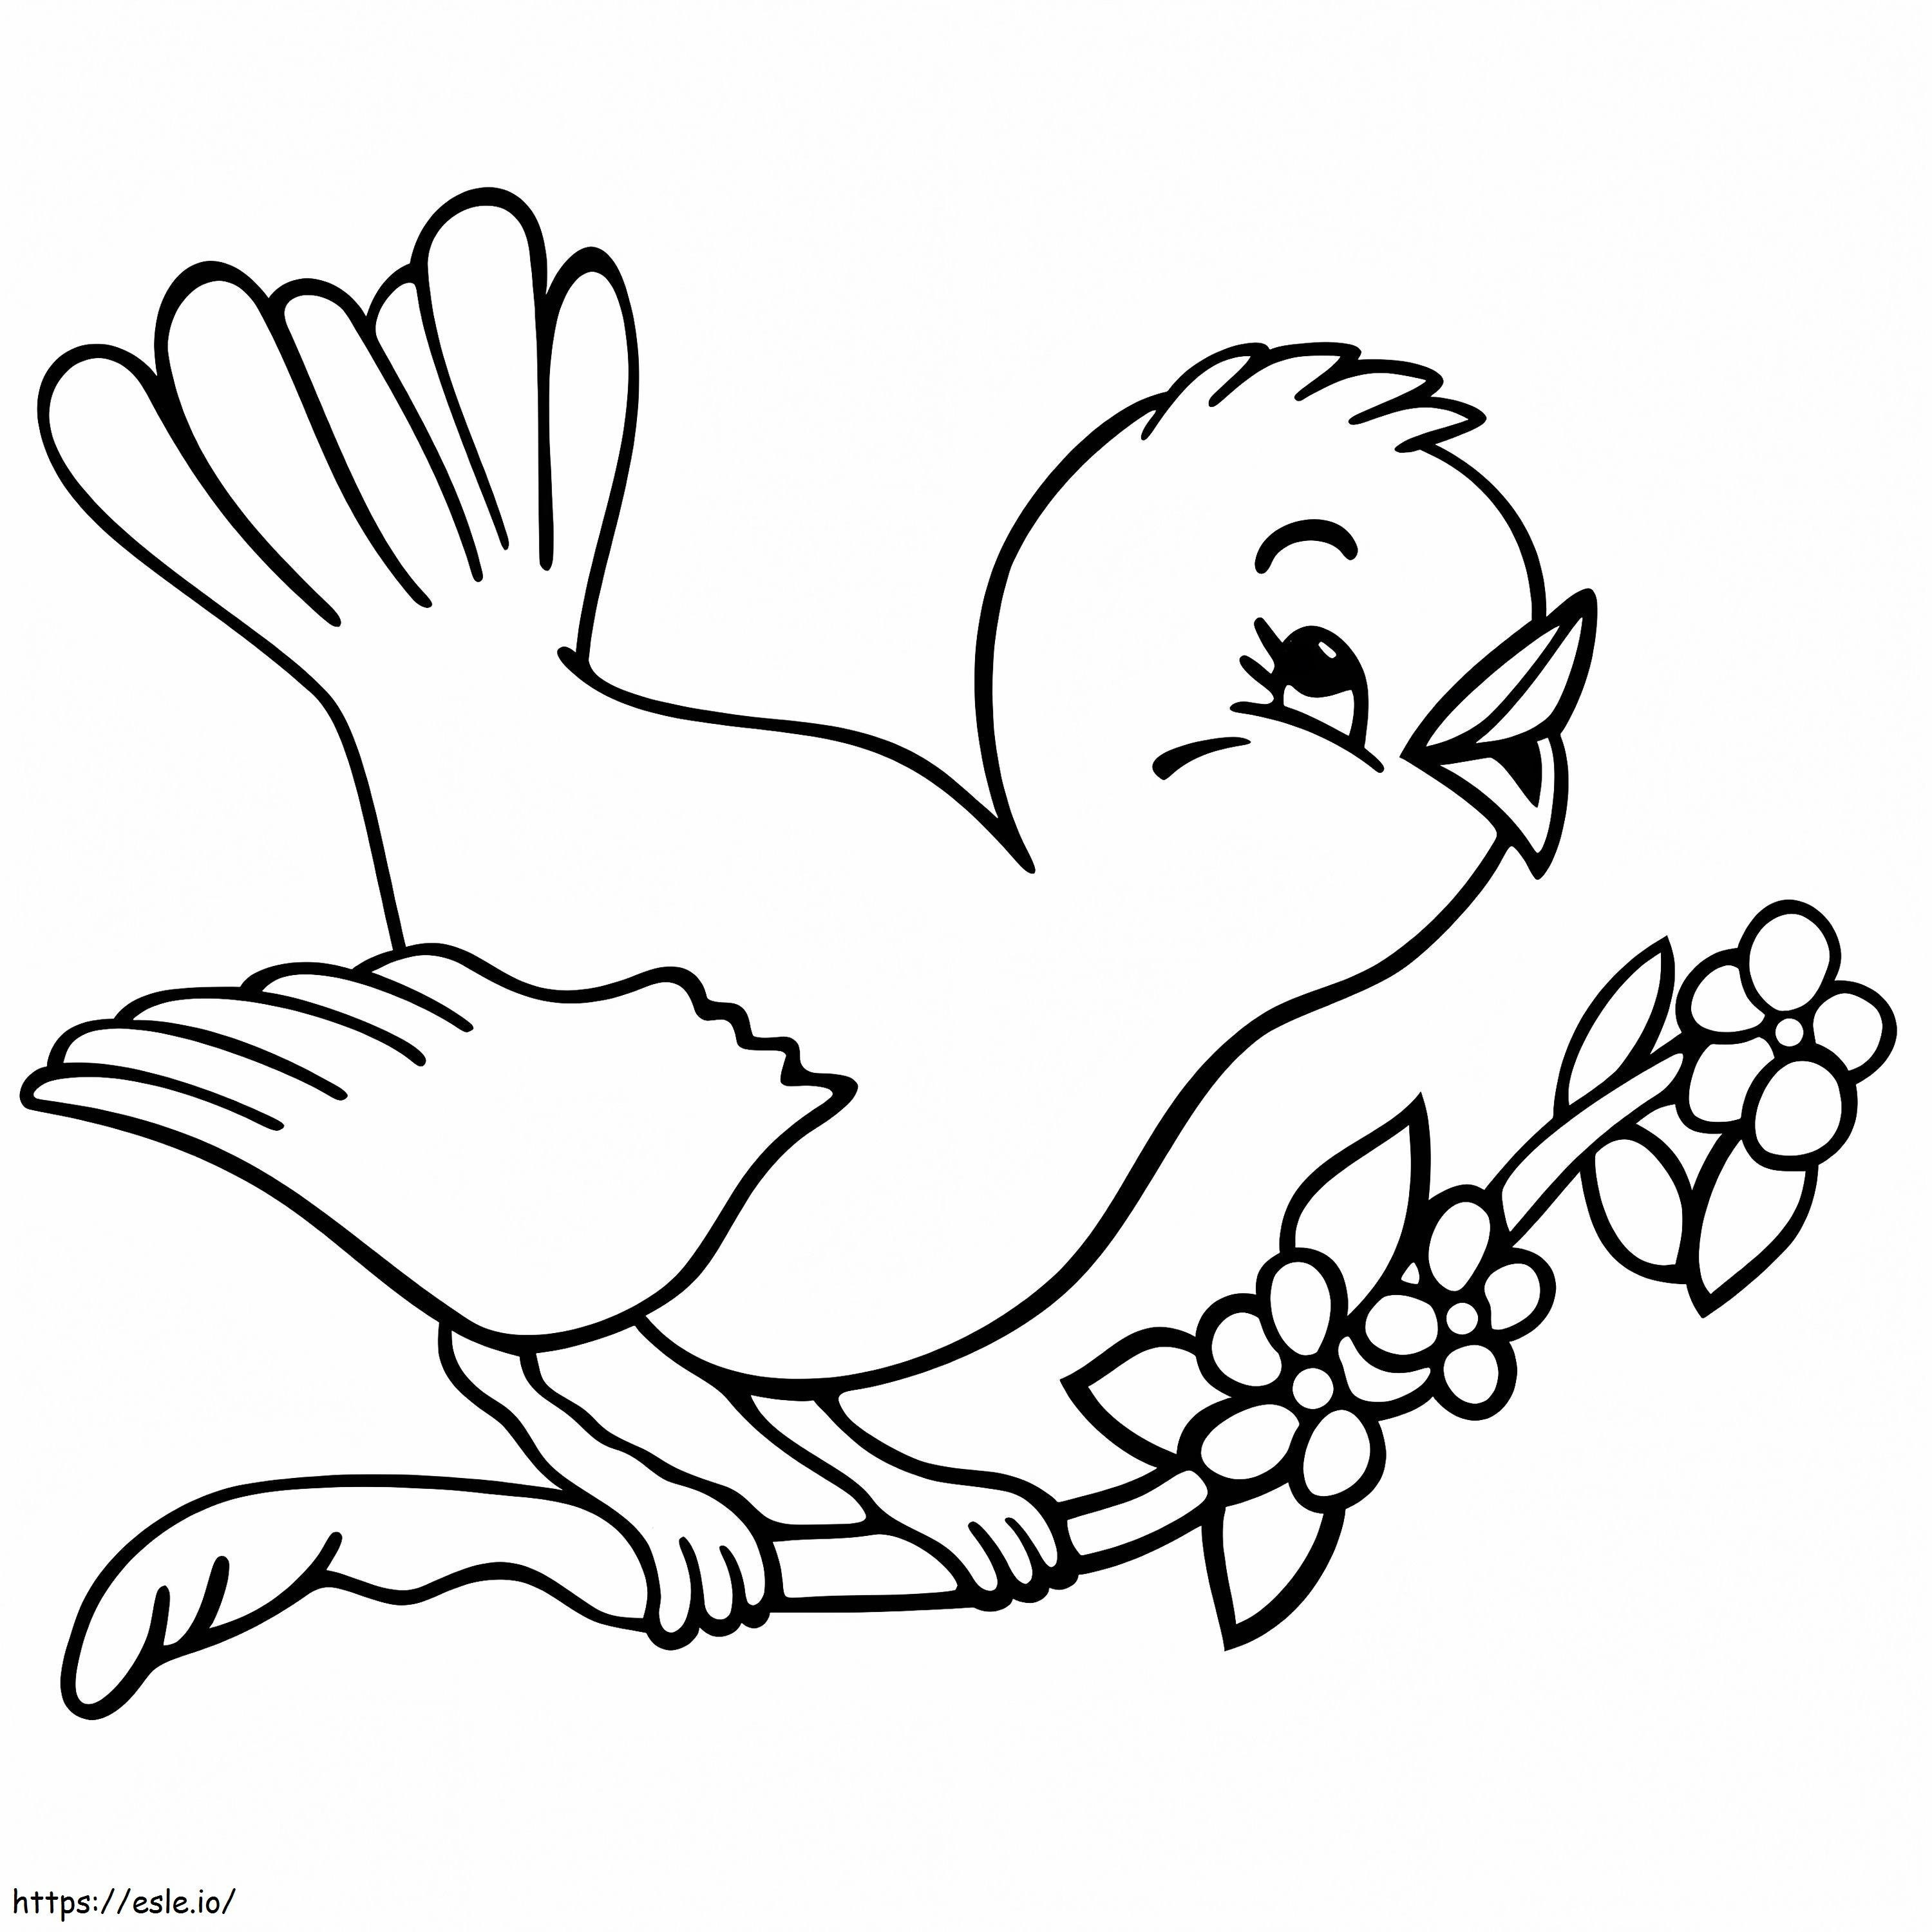 Bird On Branch A4 coloring page